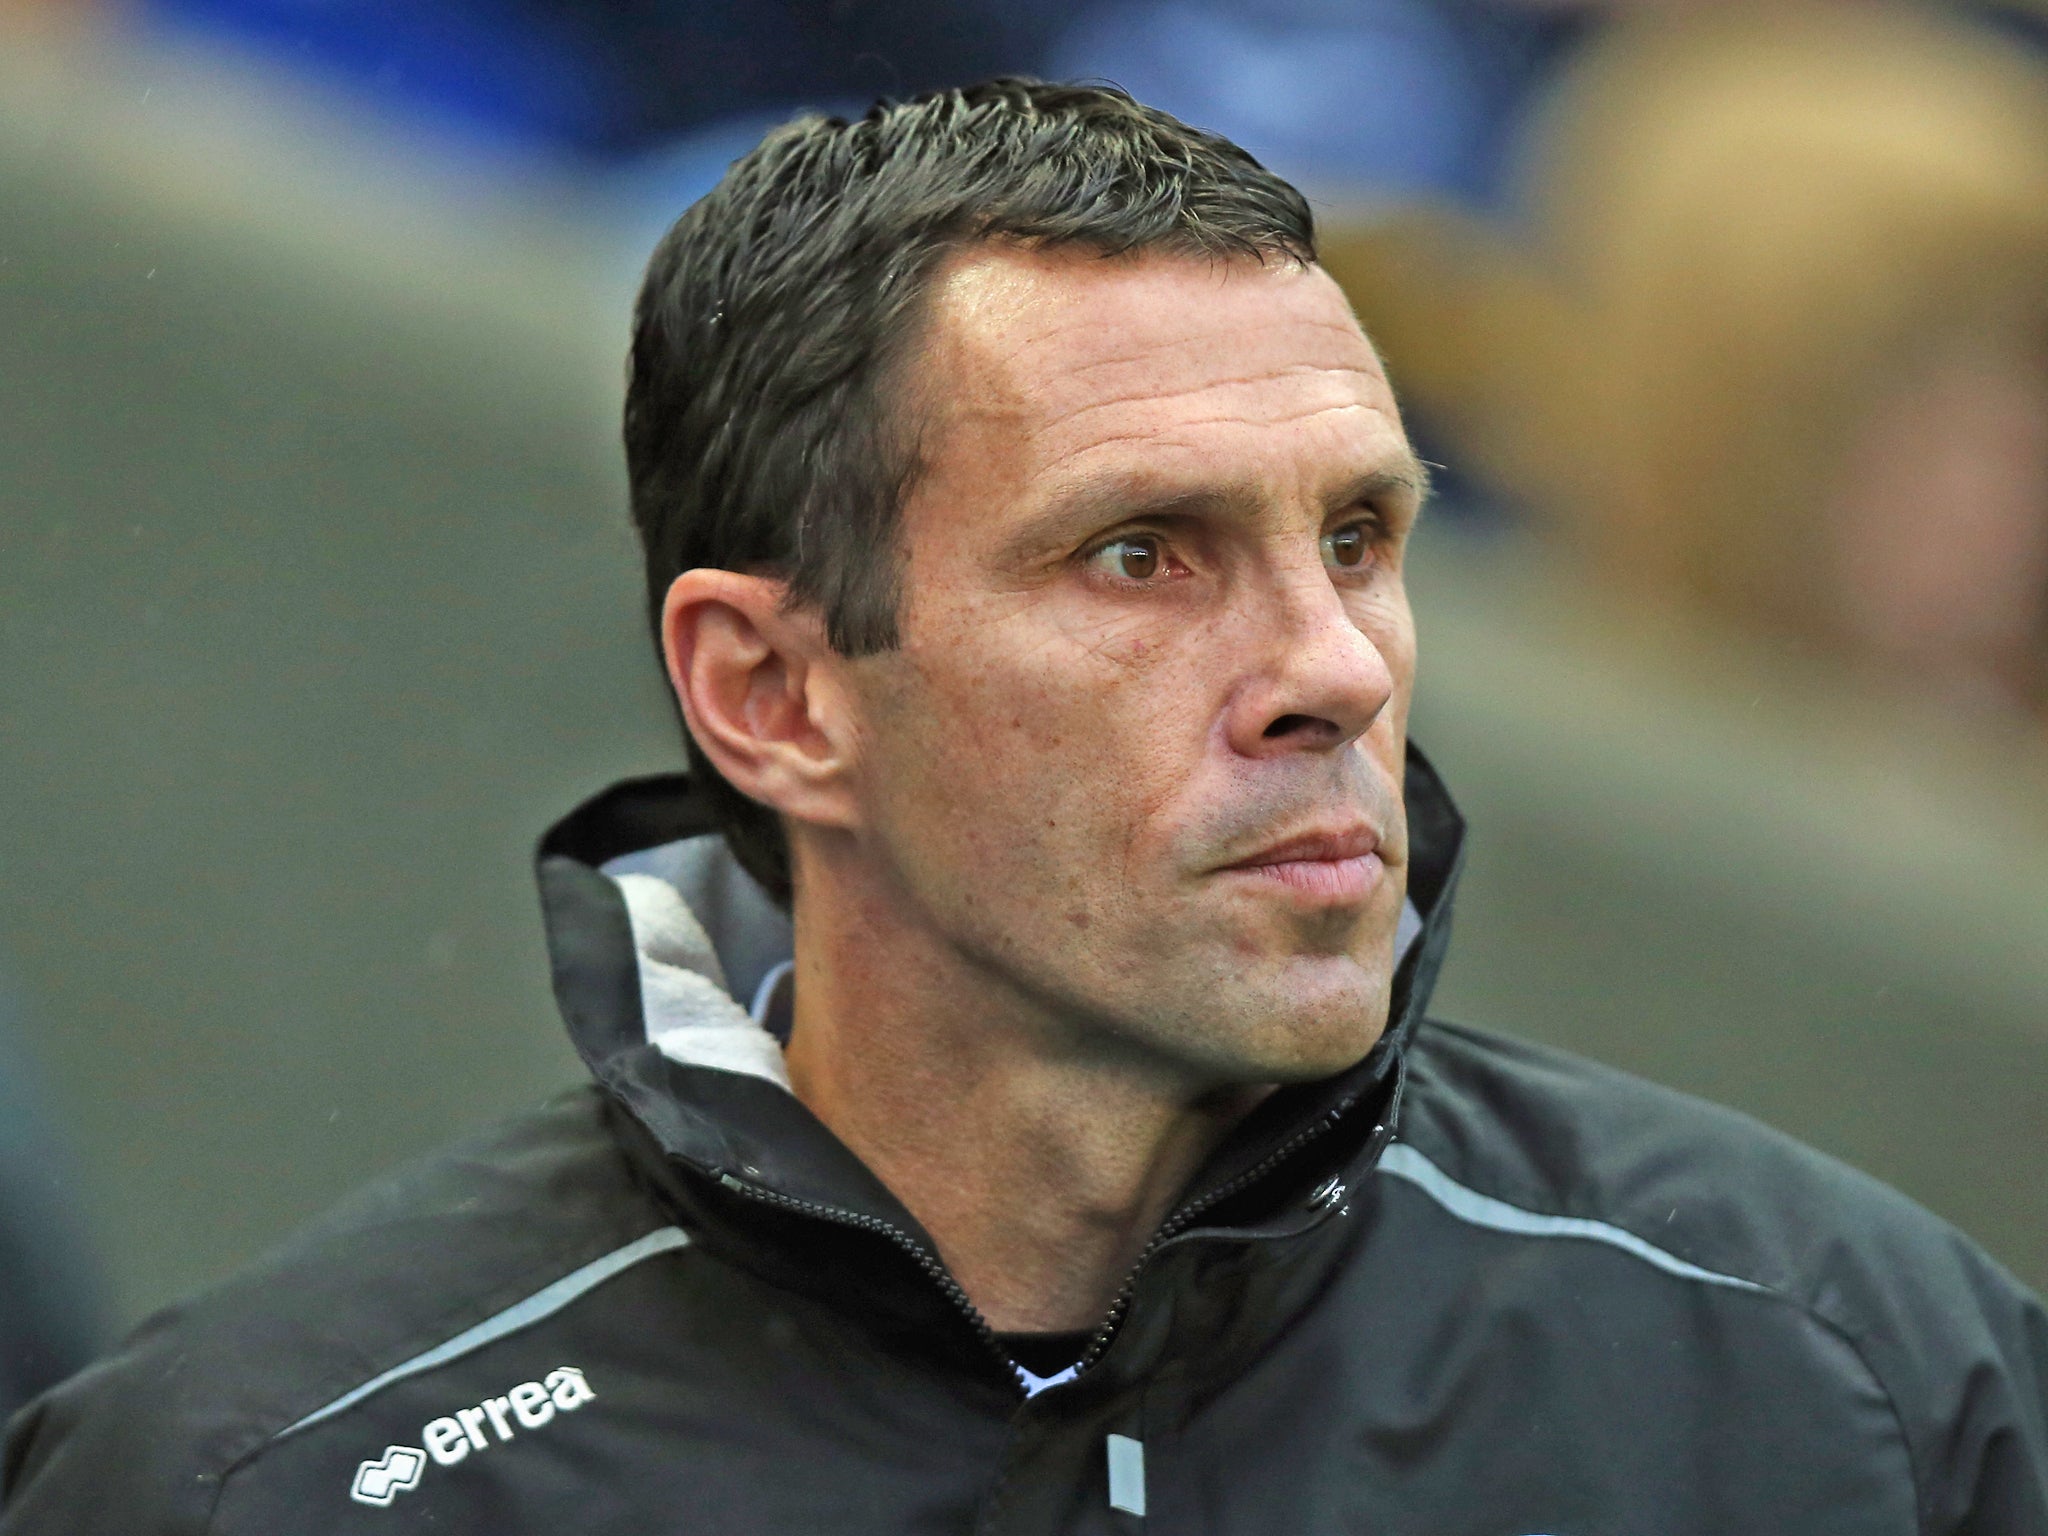 Poyet hopes putting three points on the board may lead to slip-ups from the sides around them